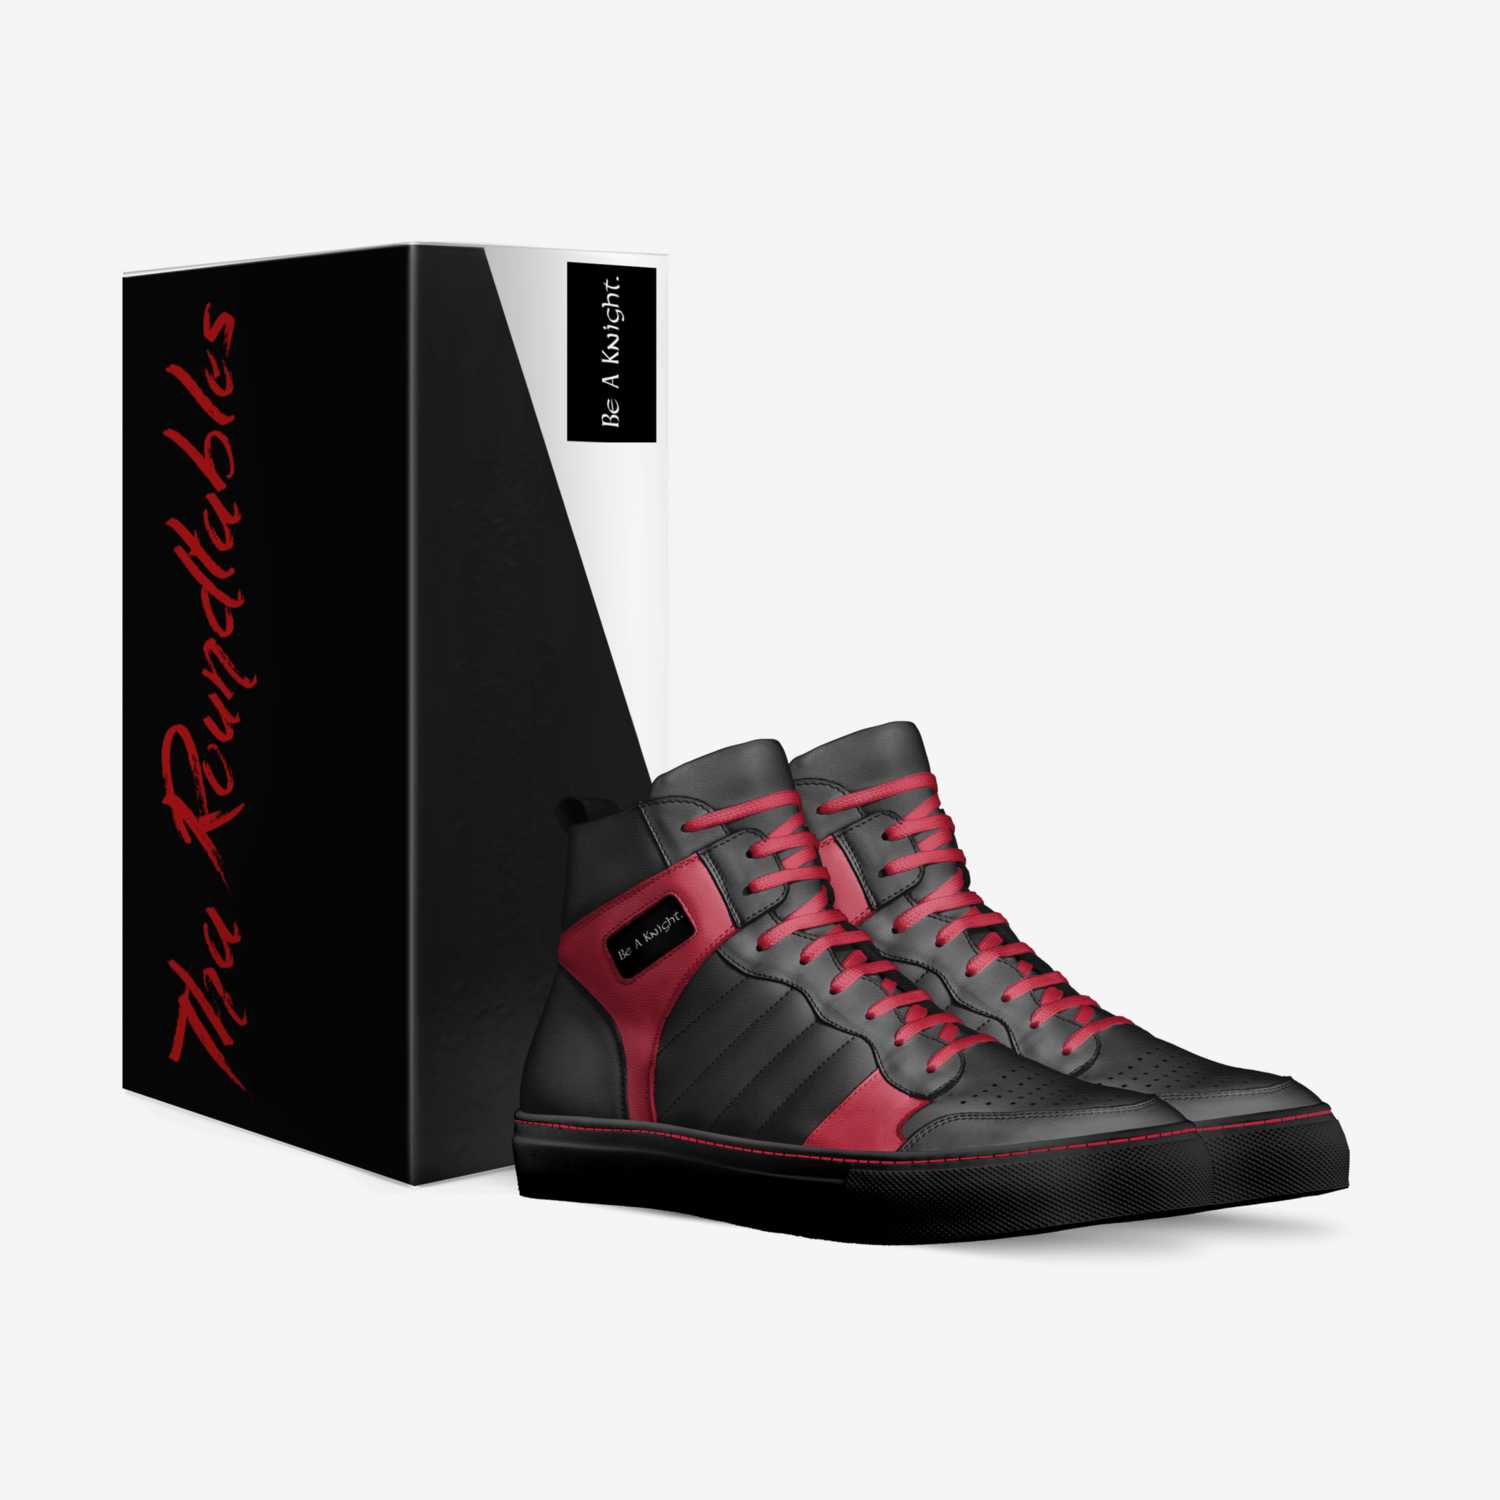 Tha Knight Walkers custom made in Italy shoes by Kenneth Adair Scarborough Iii | Box view